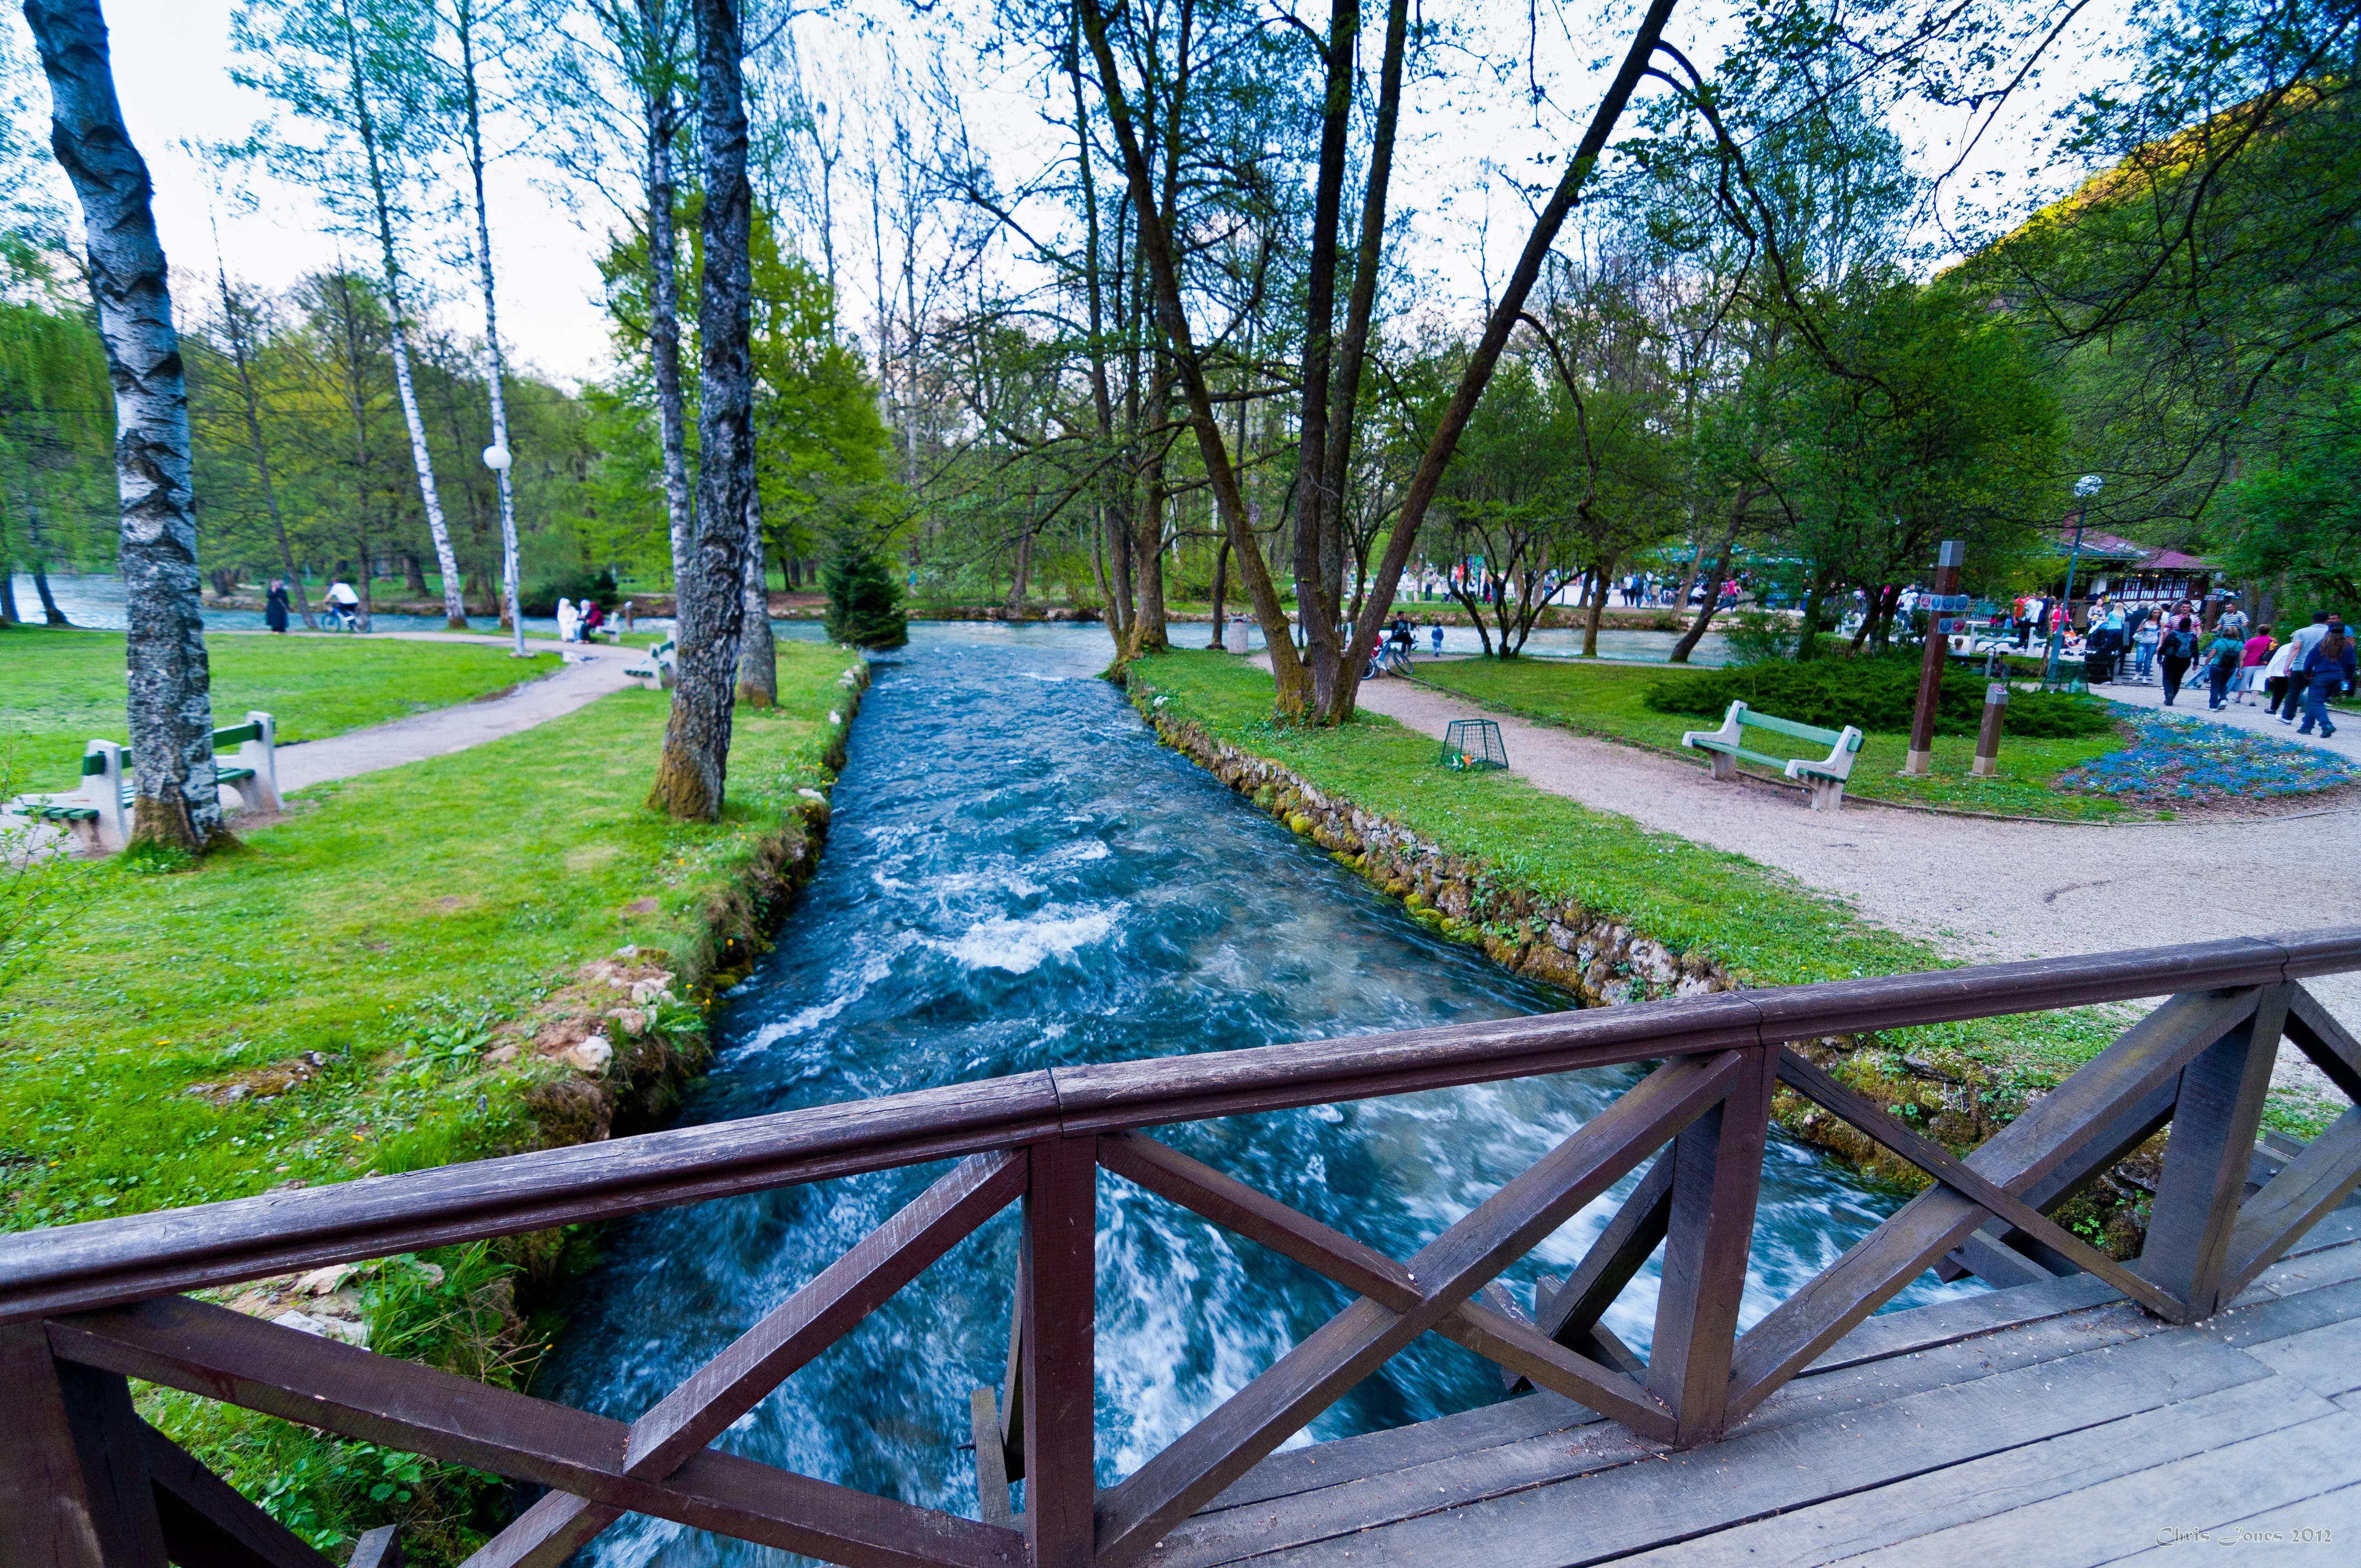 Vrelo Bosne in Bosnia and Herzegovina, Europe | Parks - Rated 3.8